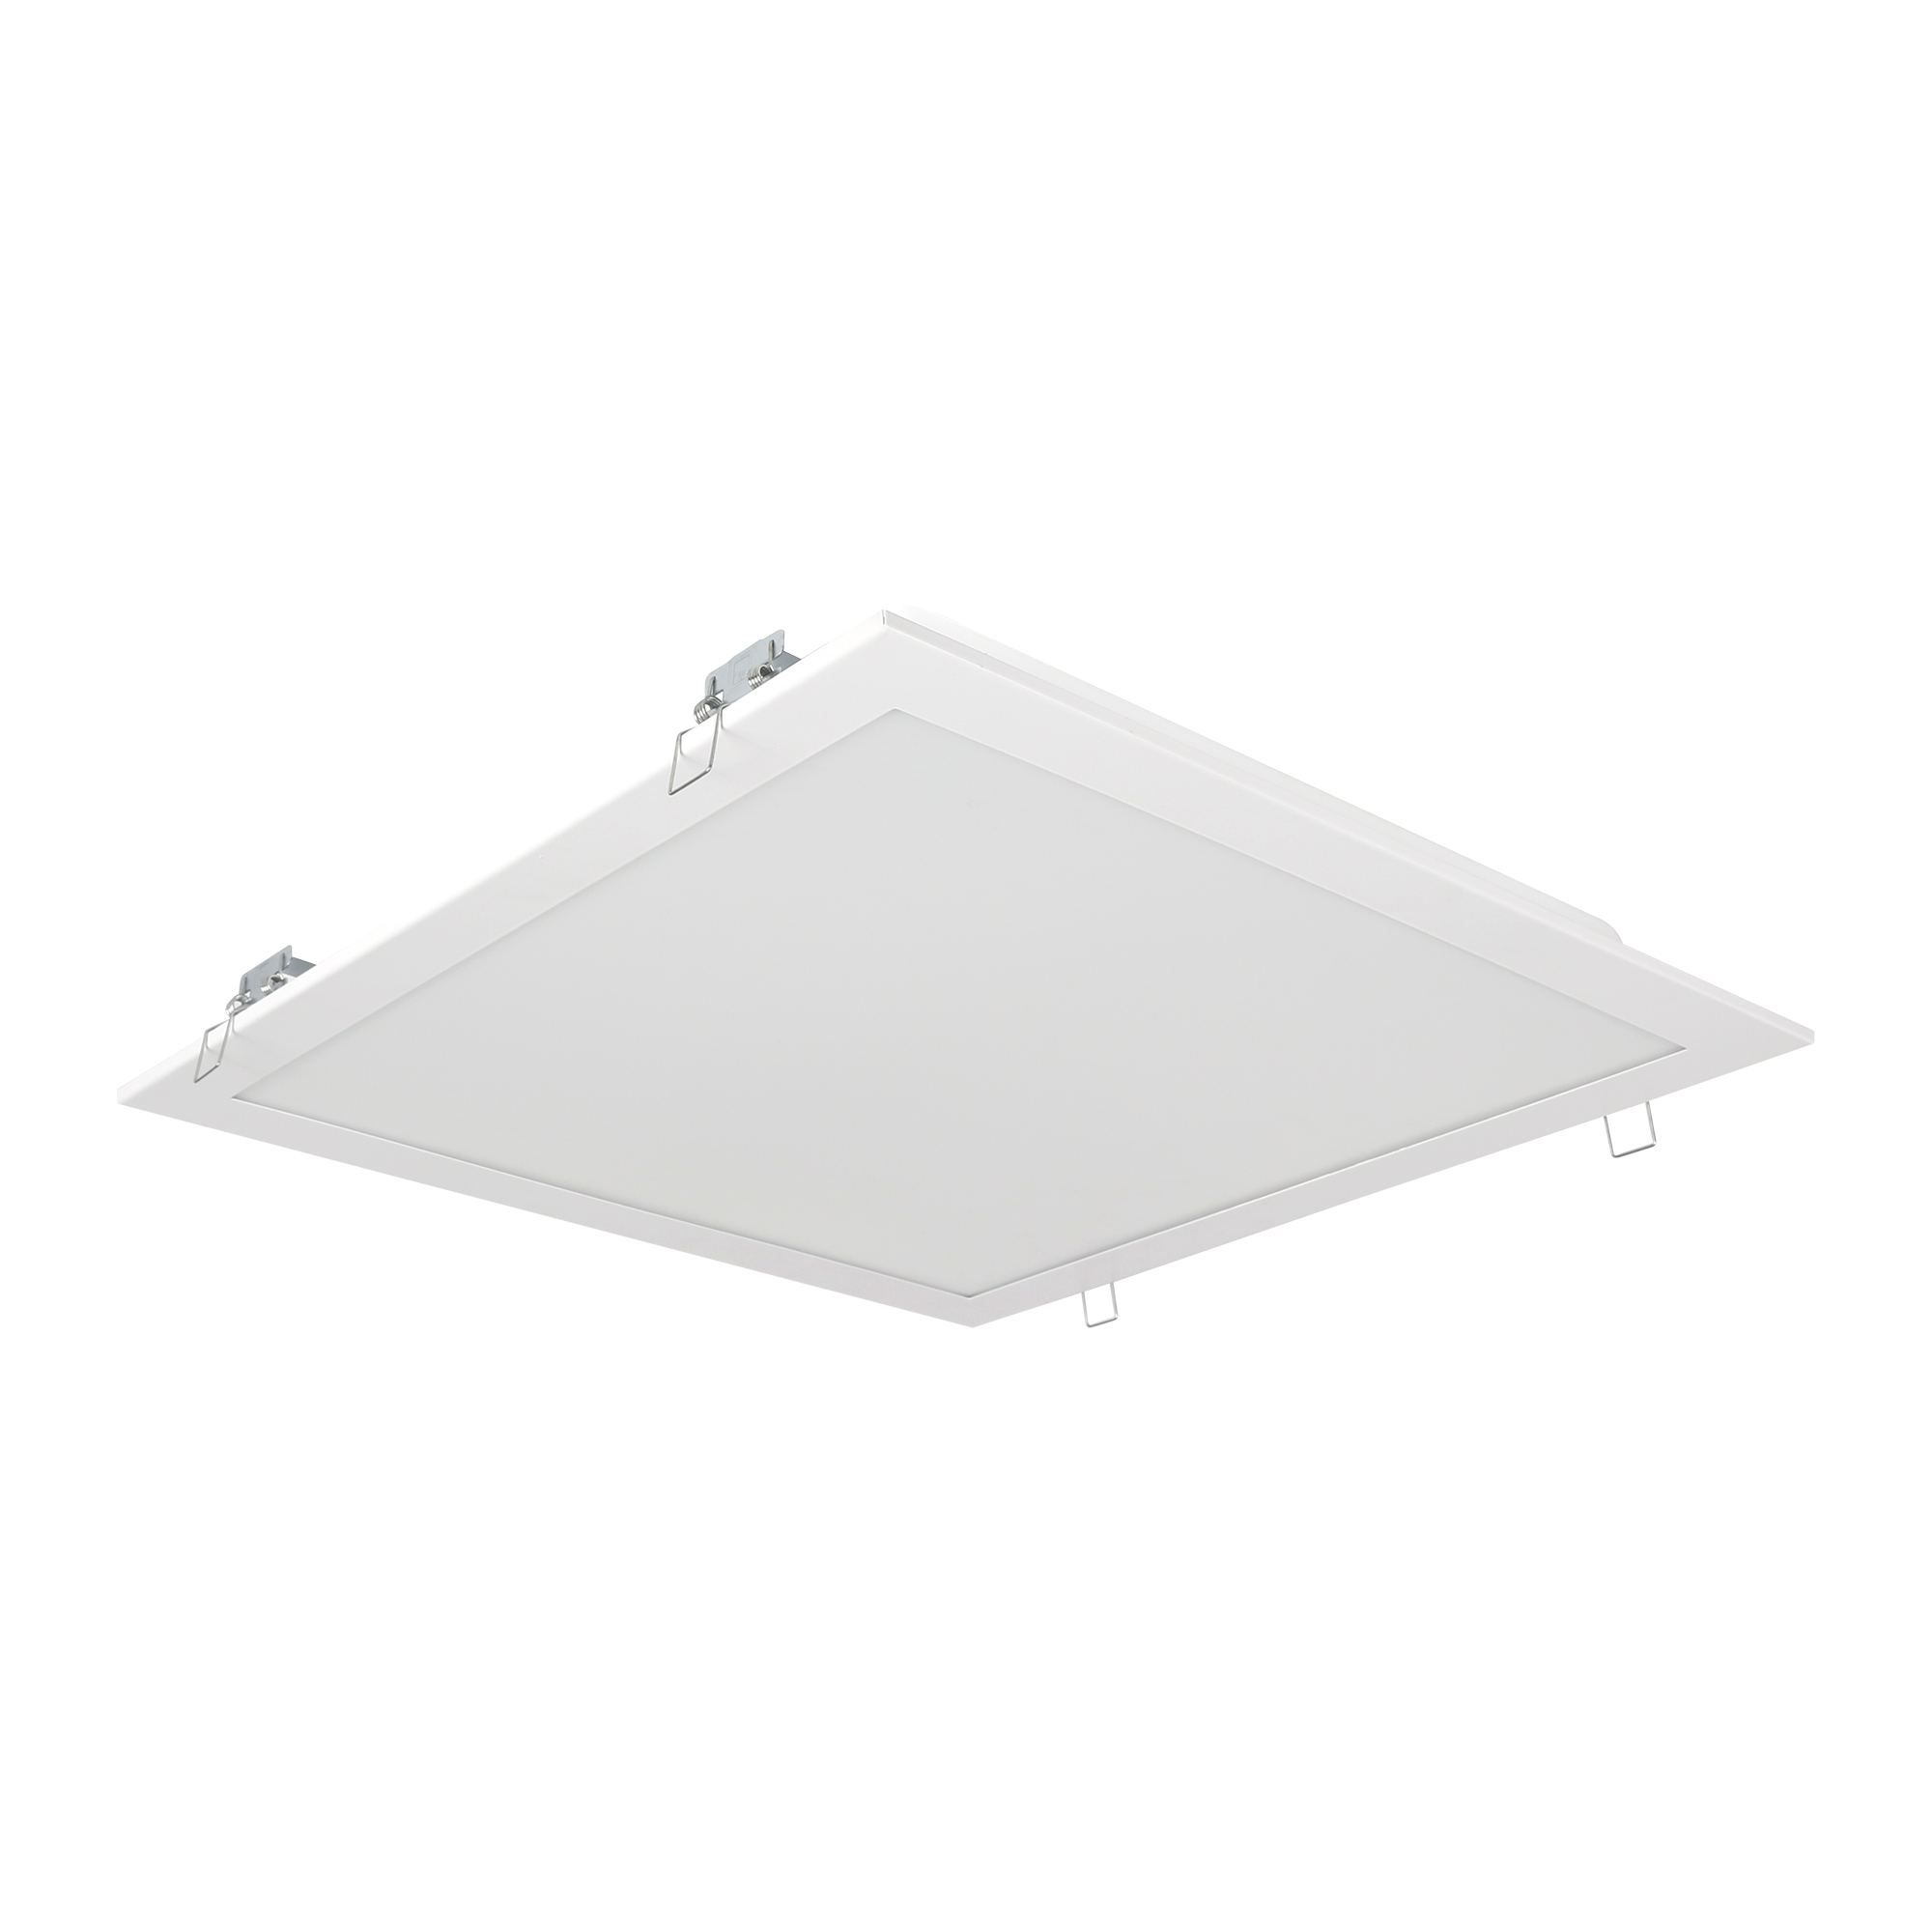 BLOOM-S Recessed Mounted